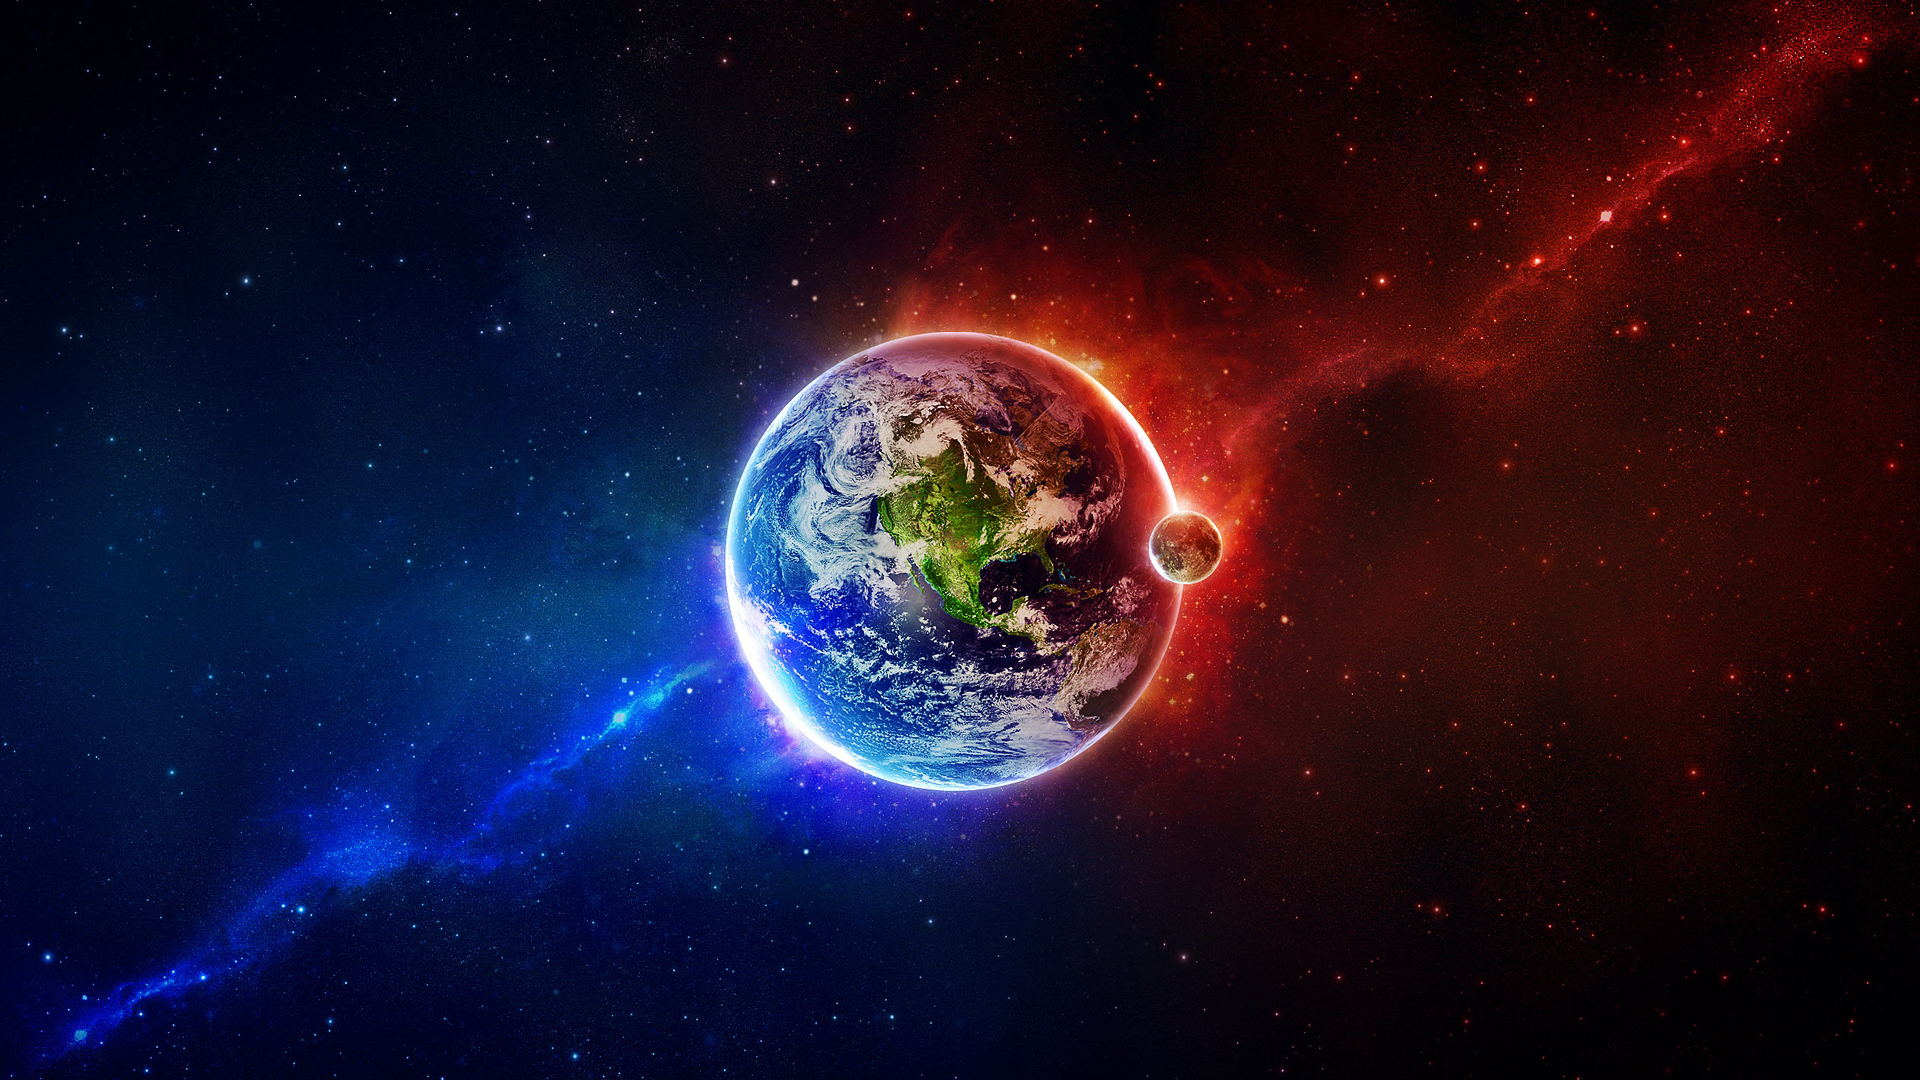 Hd Space Wallpapers 1920X1080 | HD Wallpapers (High Definition)